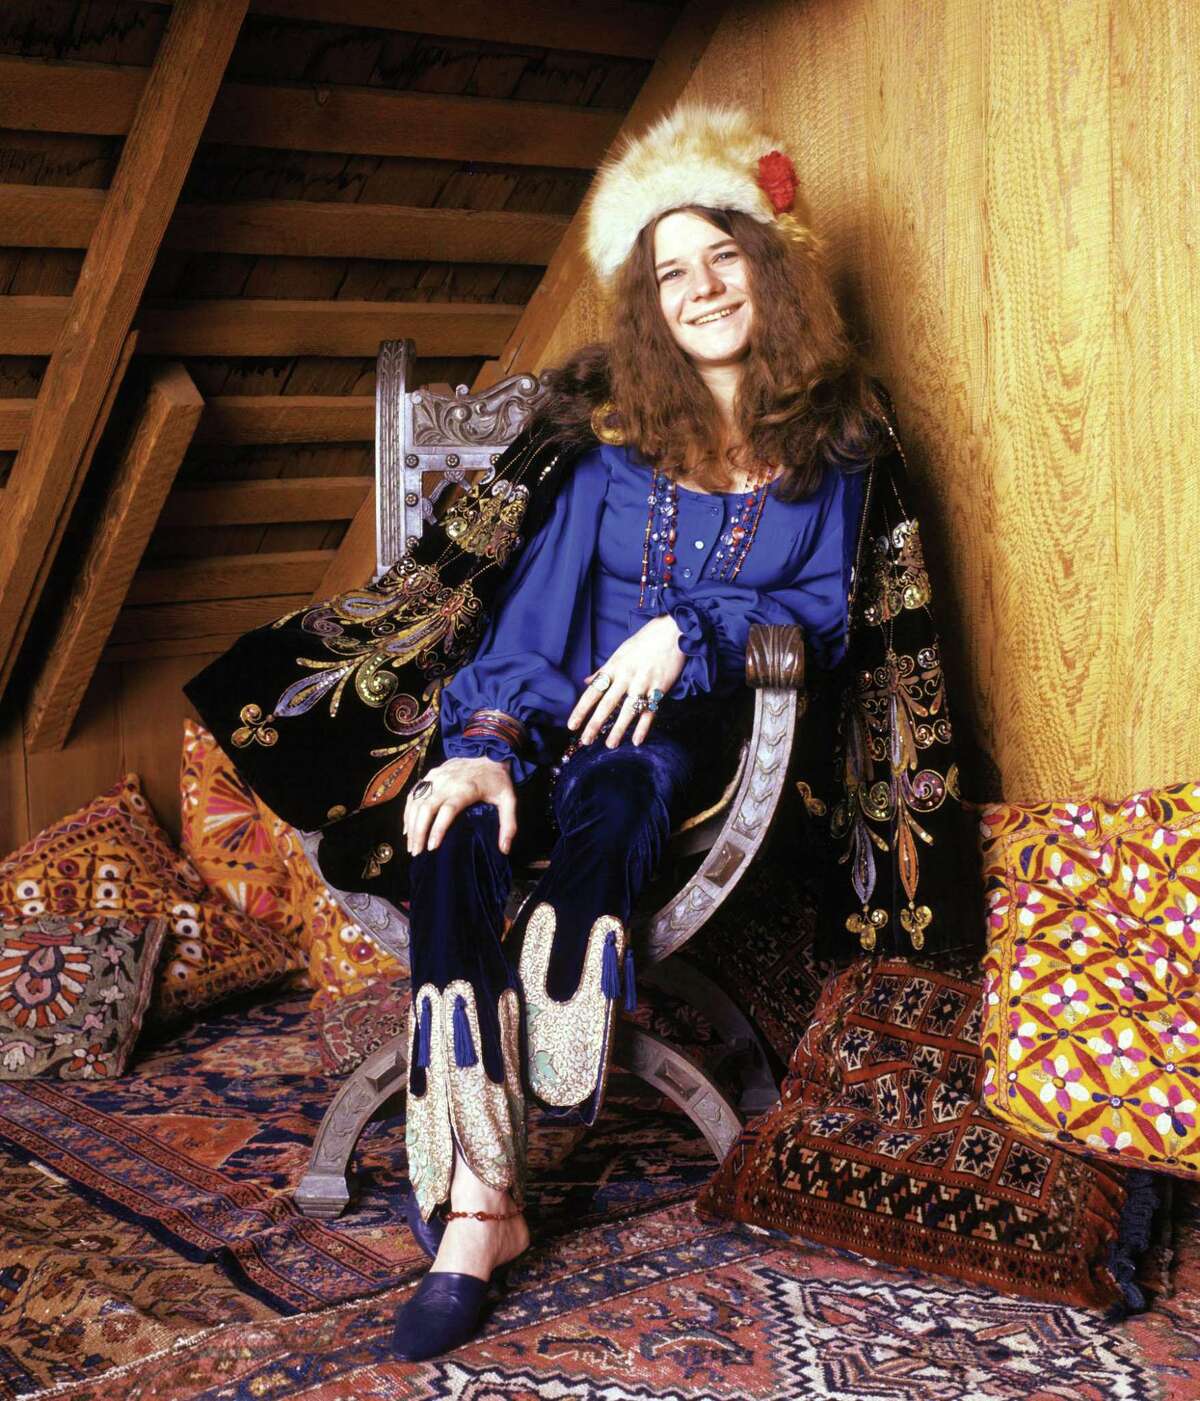 Janis Joplin, who was born on January 19, 1943, in Port Arthur, Texas, would have turned 76 this month. >>> Click through to see the legendary artist through the years.